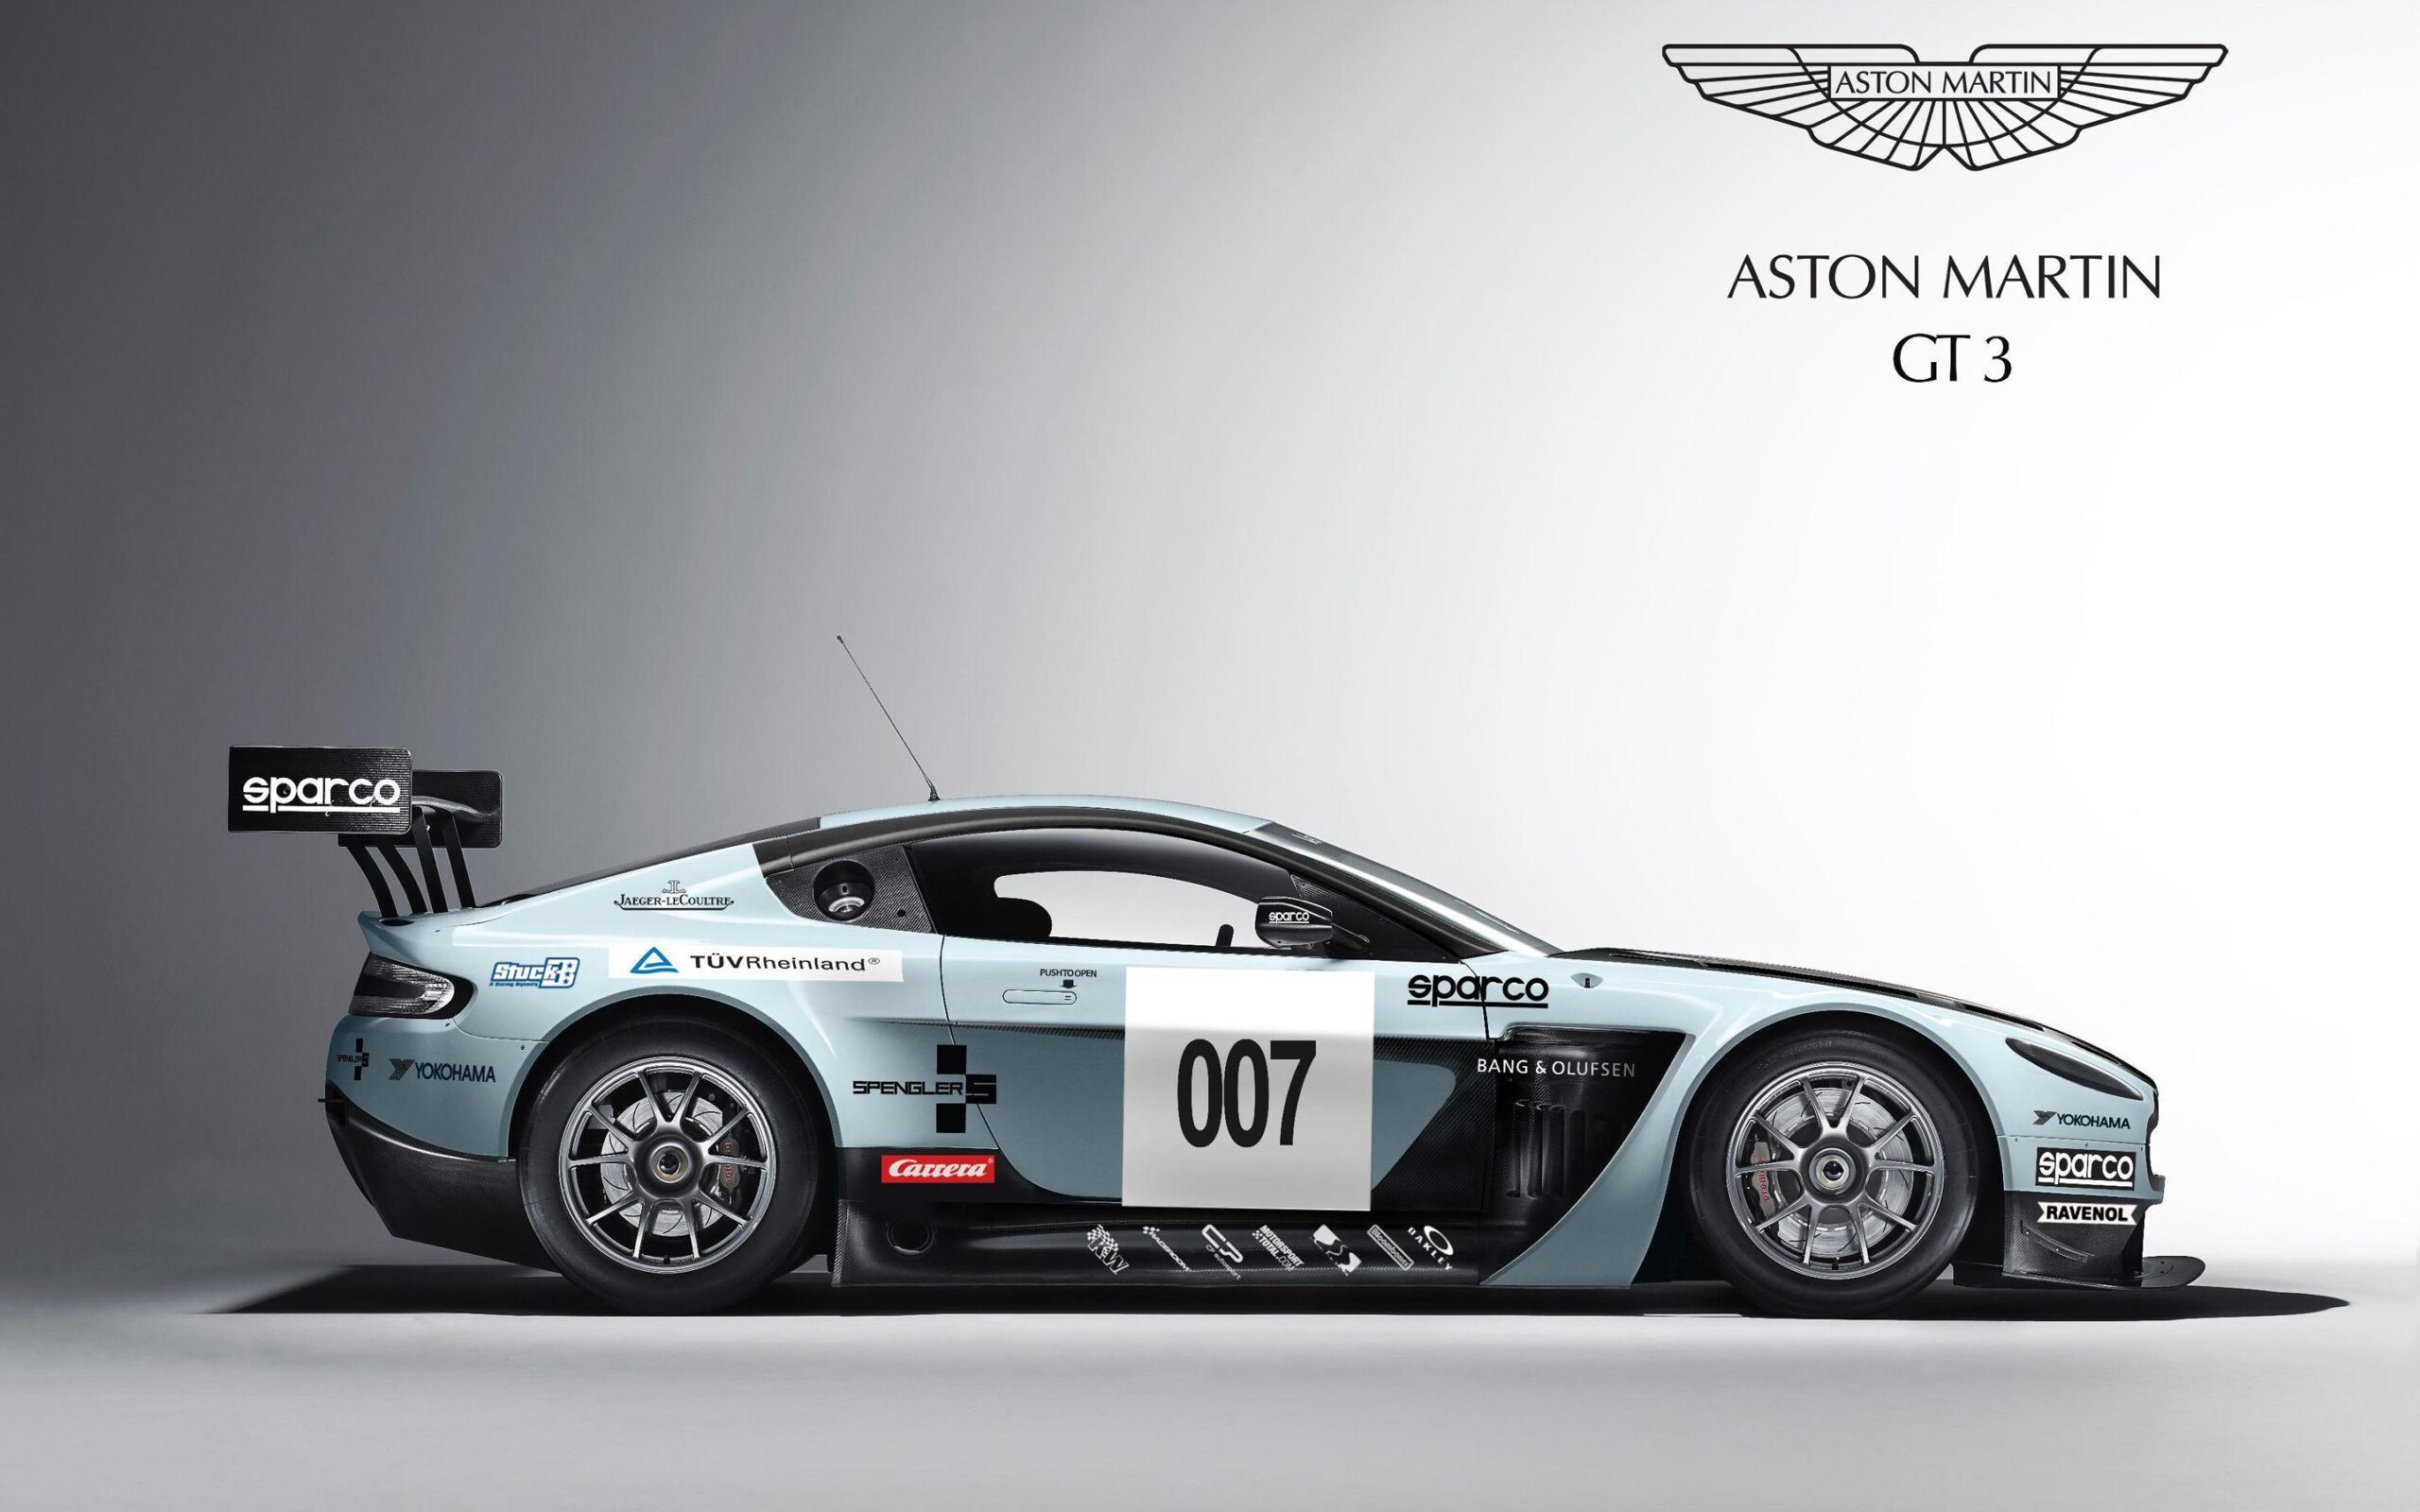 Aston Martin V8 Vantage Hd Wallpapers For Pc